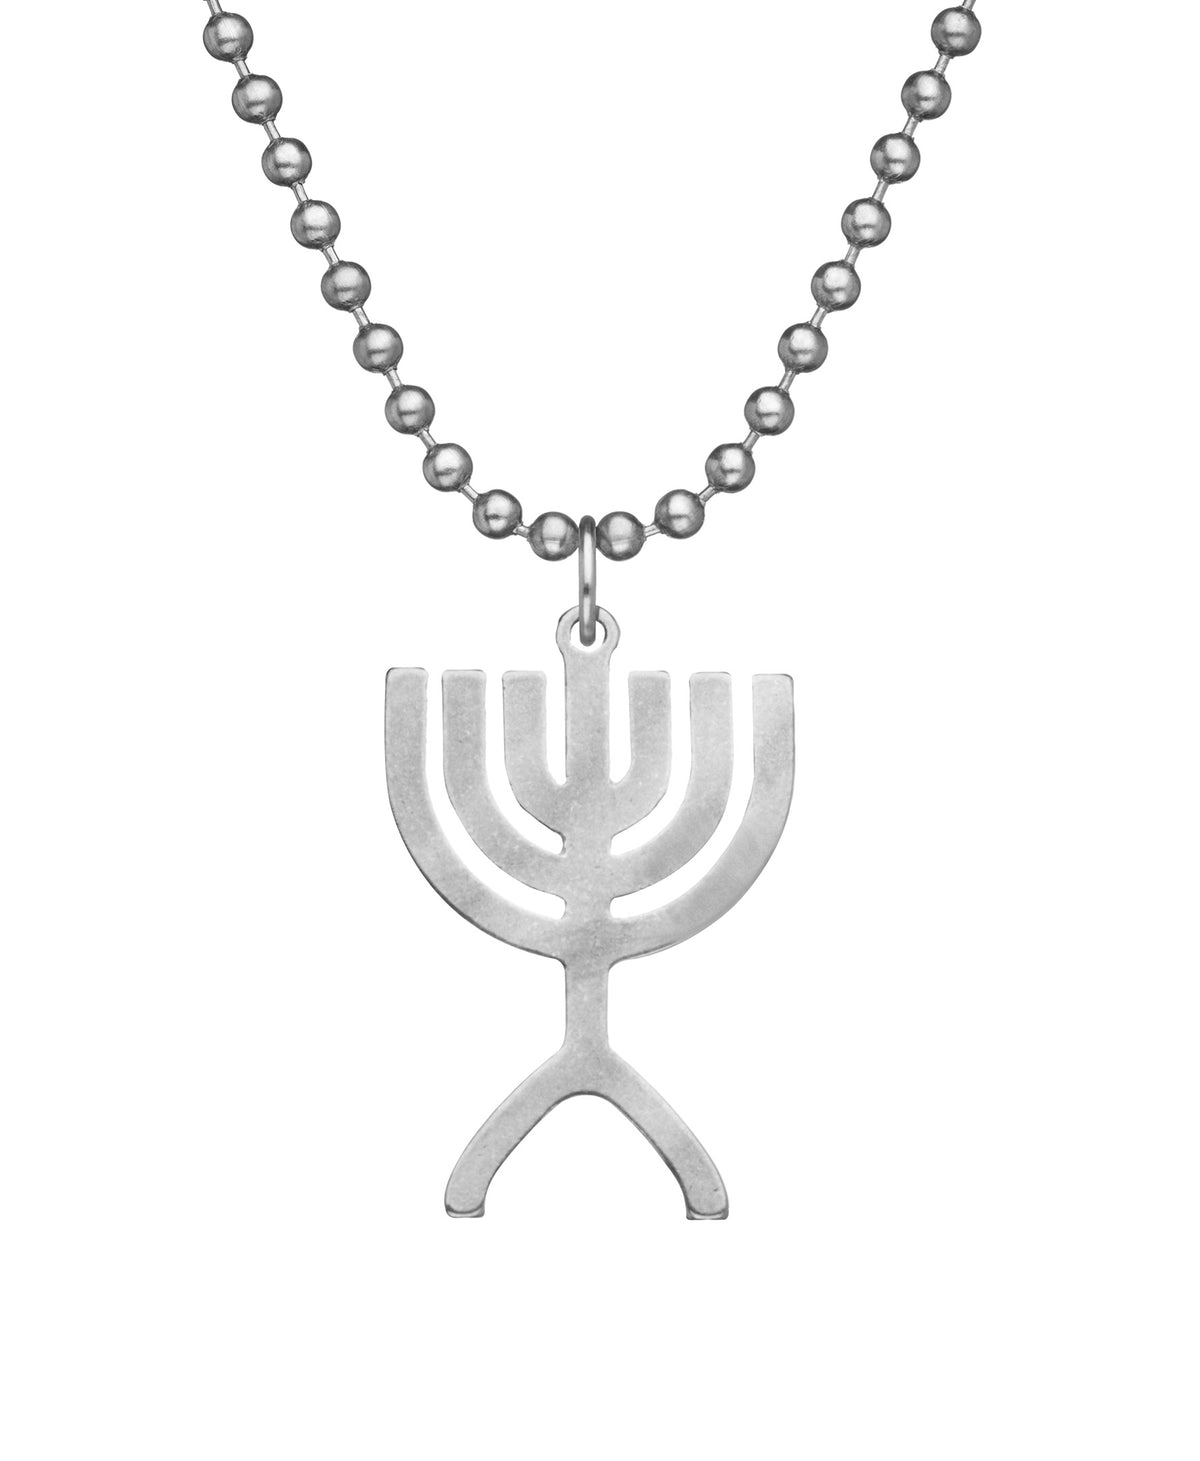 Genuine U.S. Military Issue Menorah Necklace with Dog Tag Chain